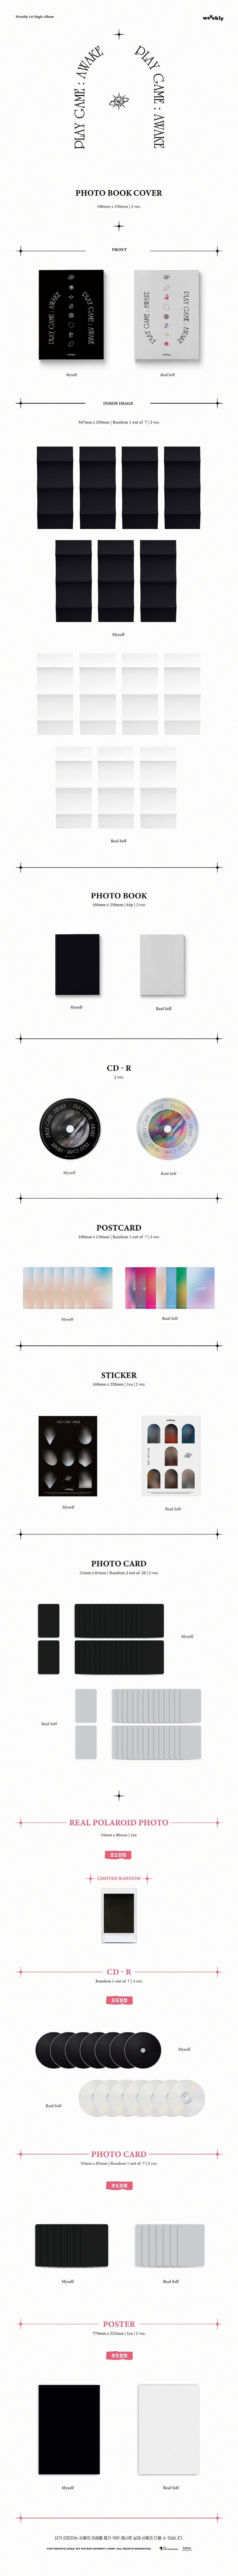 1 CD
1 Photo Book (84 pages)
1 Postcard (random out of 7 types)
1 Sticker
2 Photo Cards (random out of 28 types)